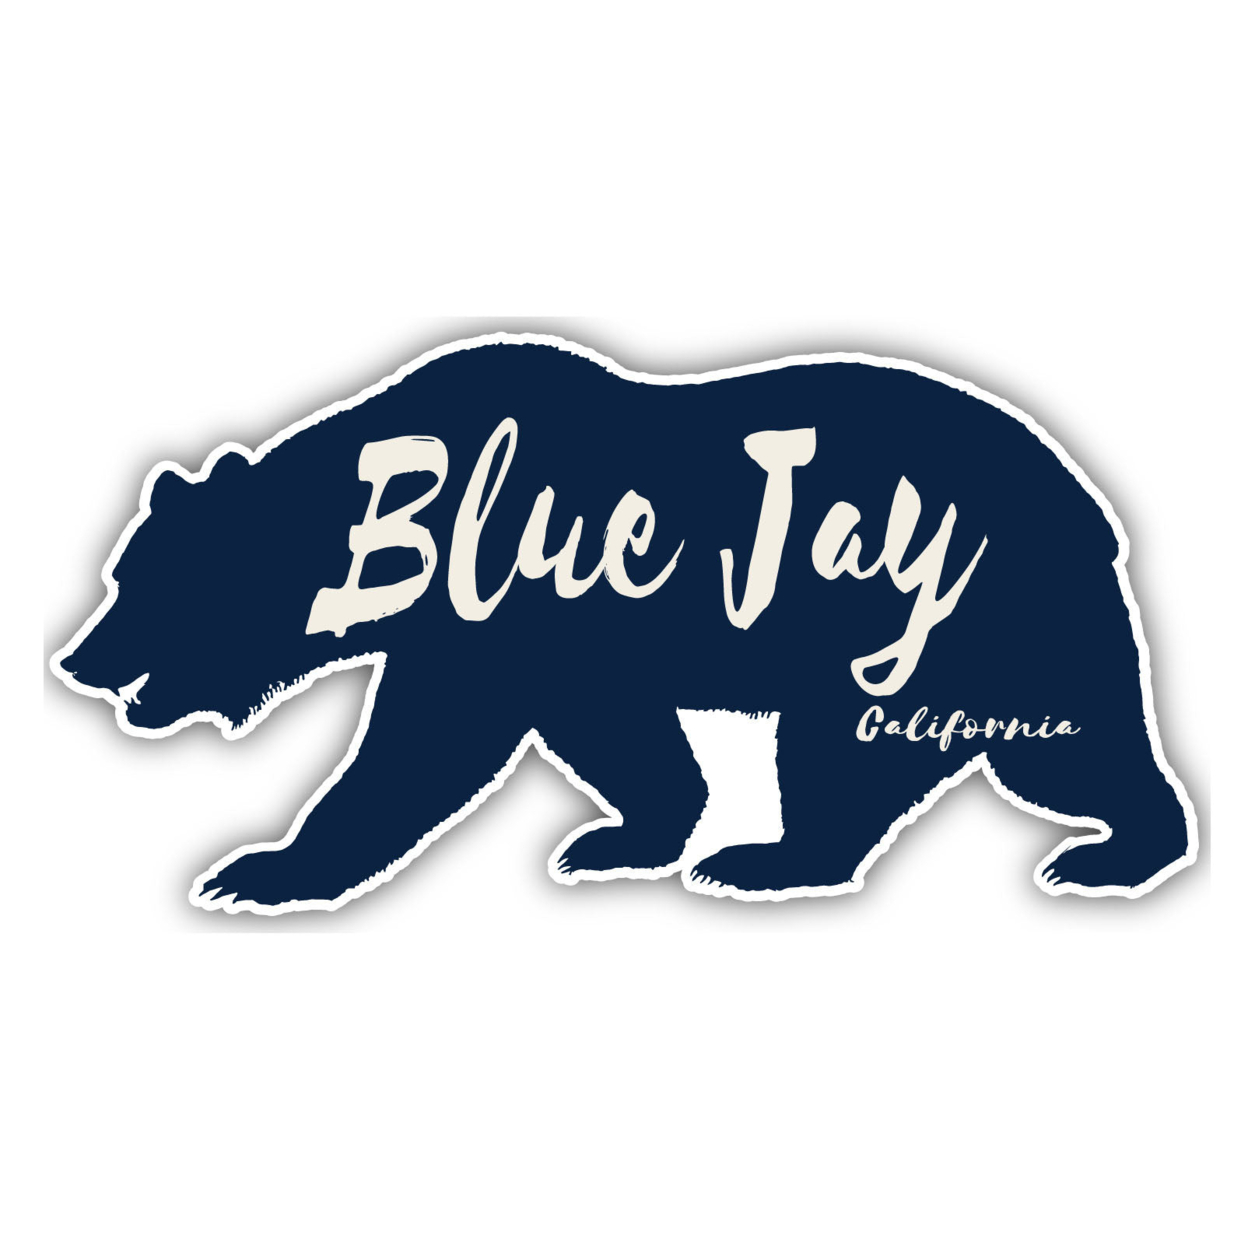 Blue Jay California Souvenir Decorative Stickers (Choose Theme And Size) - 4-Pack, 6-Inch, Bear